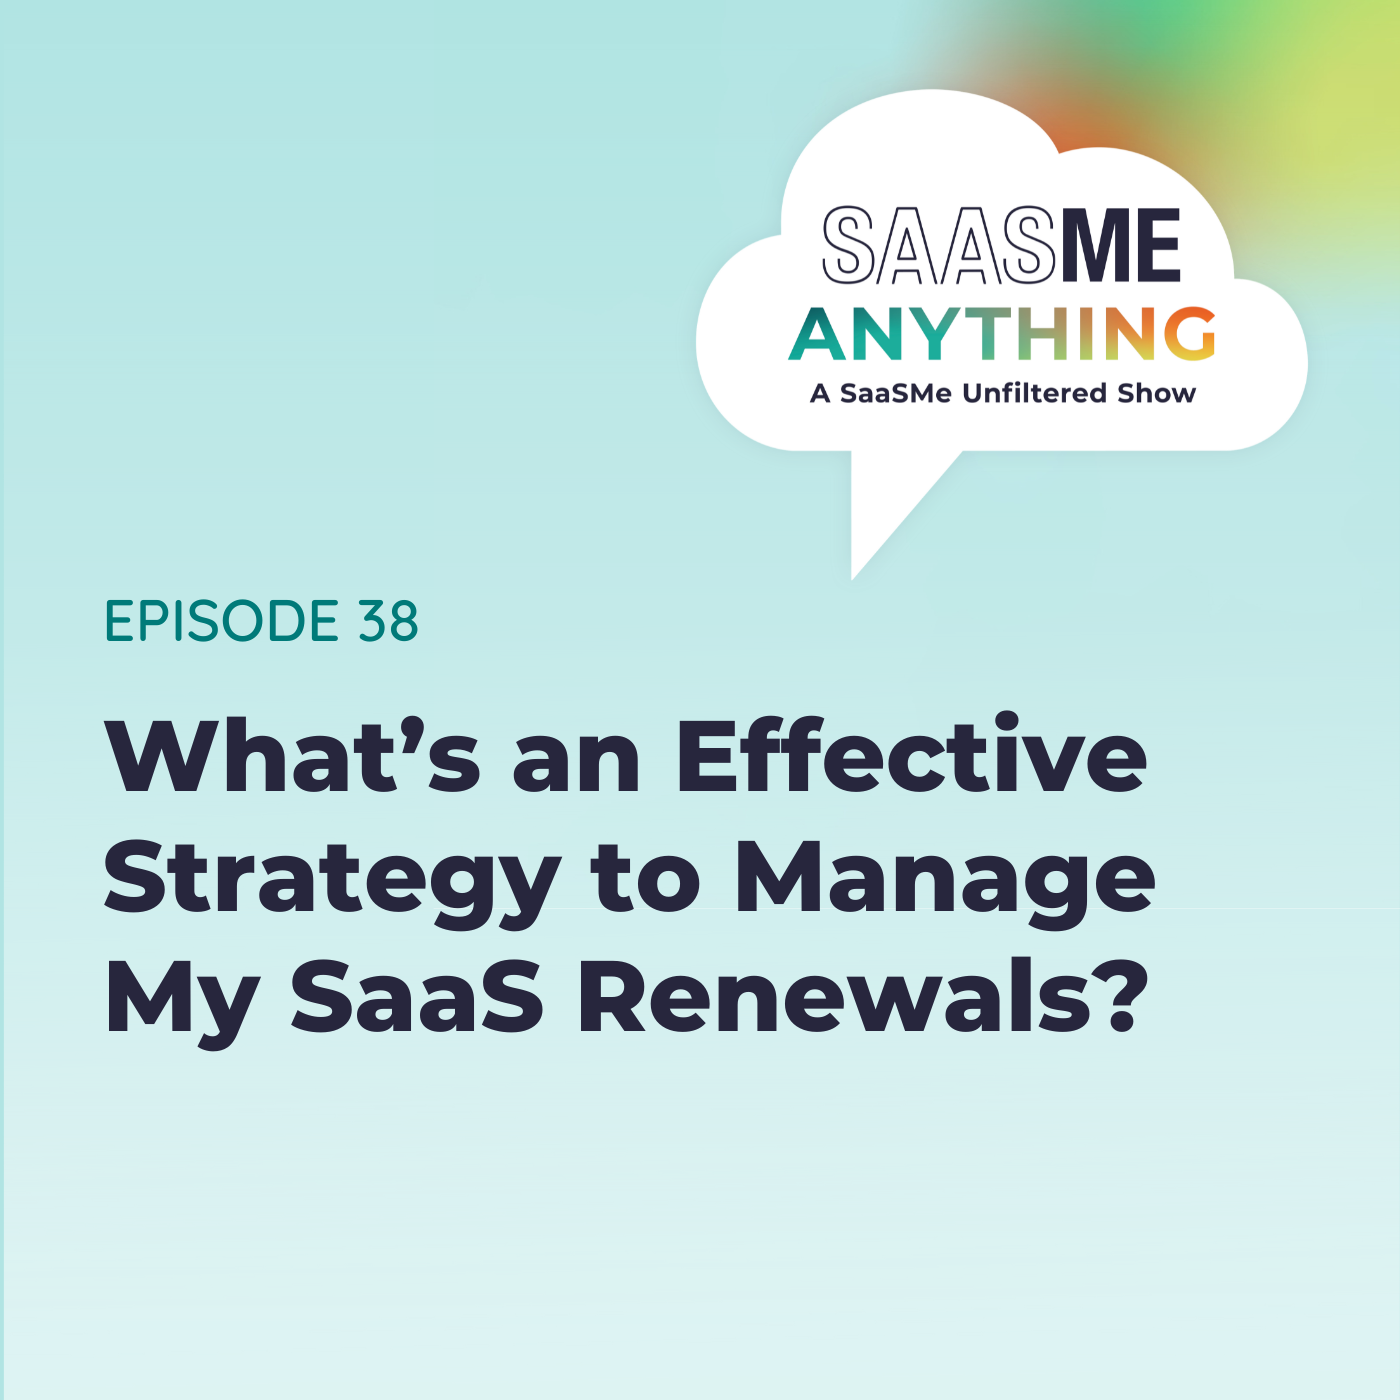 What’s an Effective Strategy to Manage My SaaS Renewals?